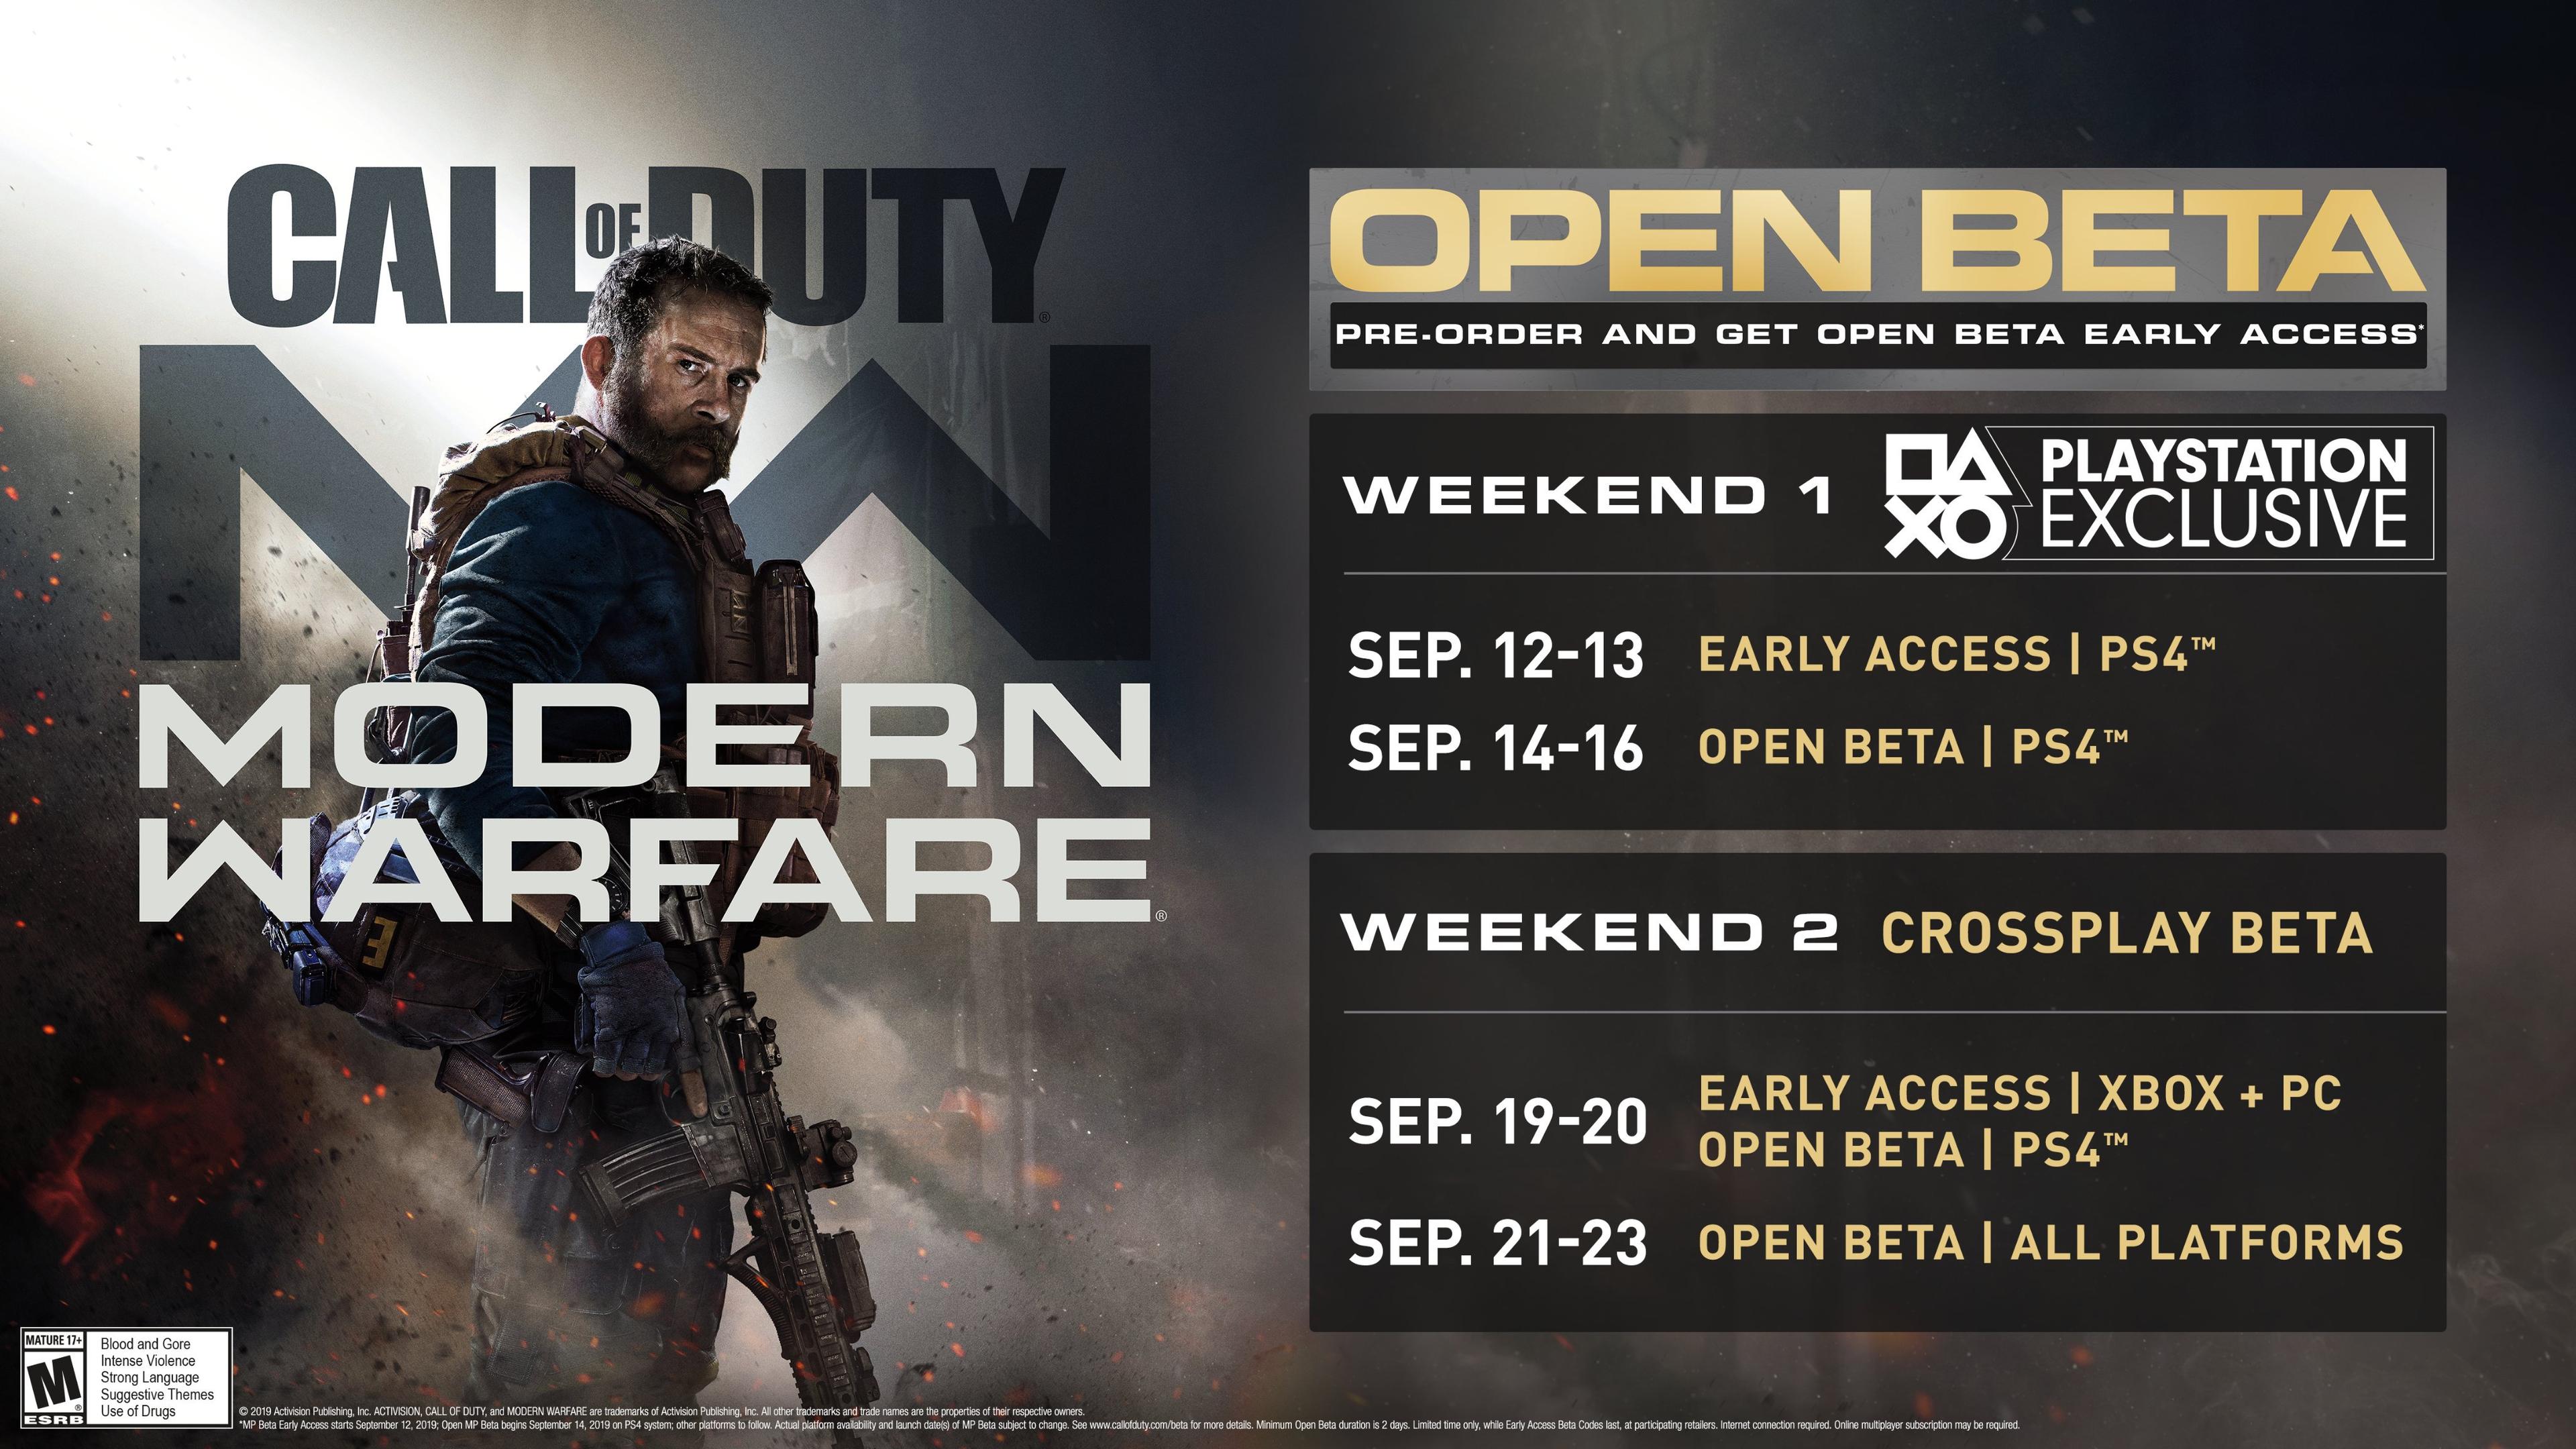 Call of Duty Modern Warfare Open Beta Details Dates, Content, And